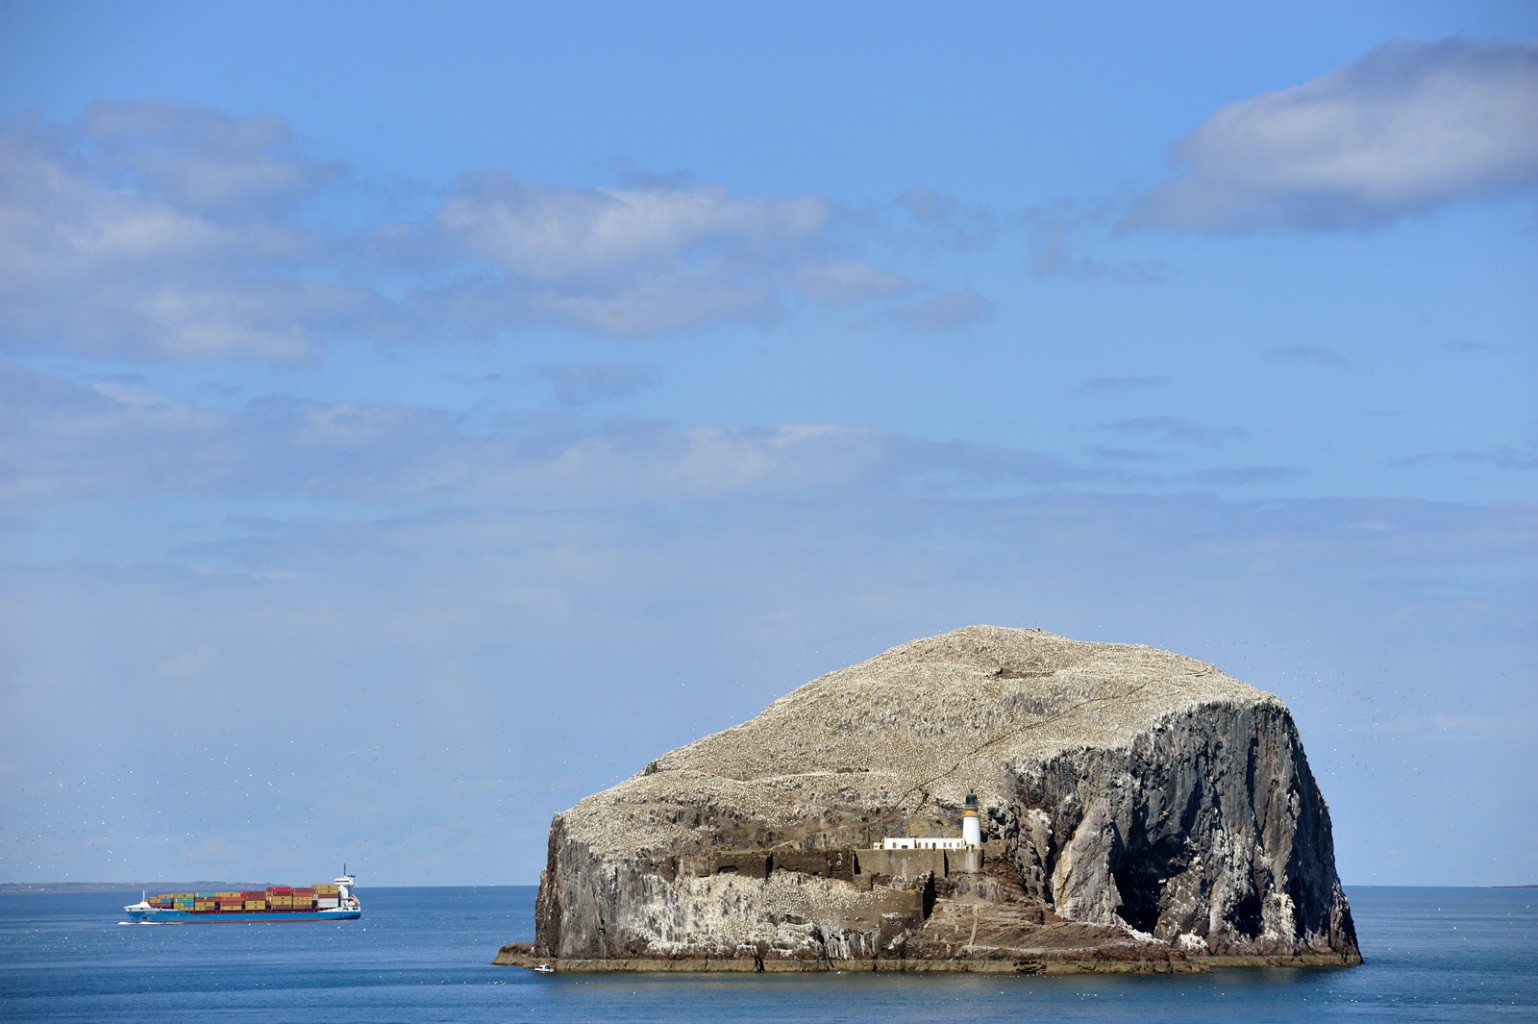 Bass Rock - a bird colony, a site for a lighthouse and, in the past, a prison.